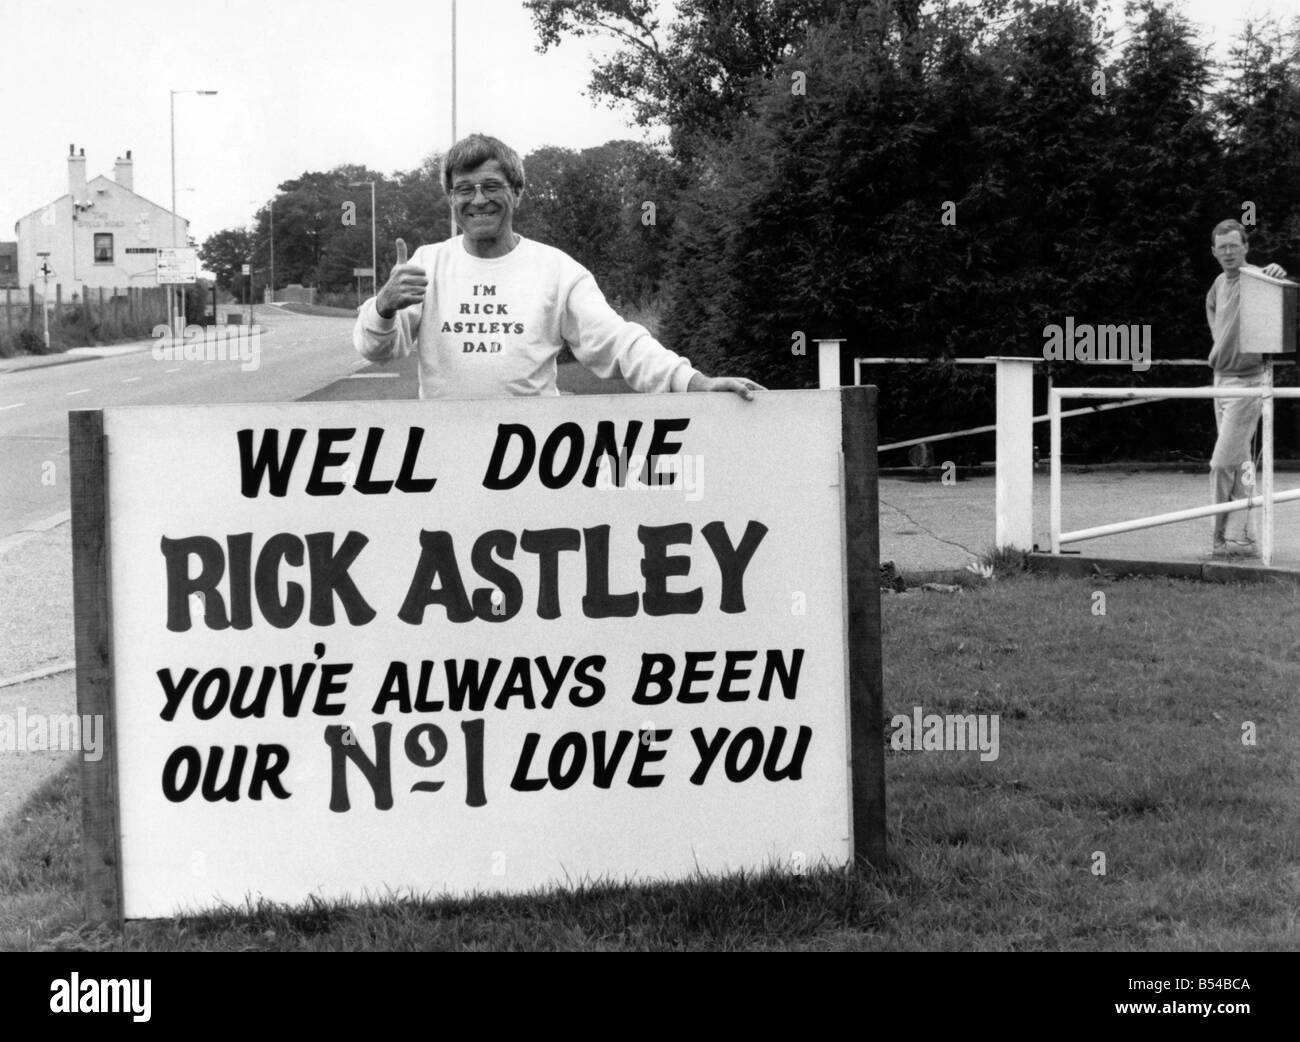 Chart topping singer Rick Astley whose single 'Never Gonna Give You Up' has been at number one in the British charts has got a real fan club in his home town. His father, Ossie Astley, sports a T-shirt with the works, 'I'm Rick Astley's Dad' to show just how proud of his son he is. And his local fans have erected a sign telling Rick how much they think of him. The sign reads, 'Well Done Rick Astley, you've Always Been Our No 1 - Love You.' The 'Well Done' sign for Rick Astley. September 1987 P017185 Stock Photo